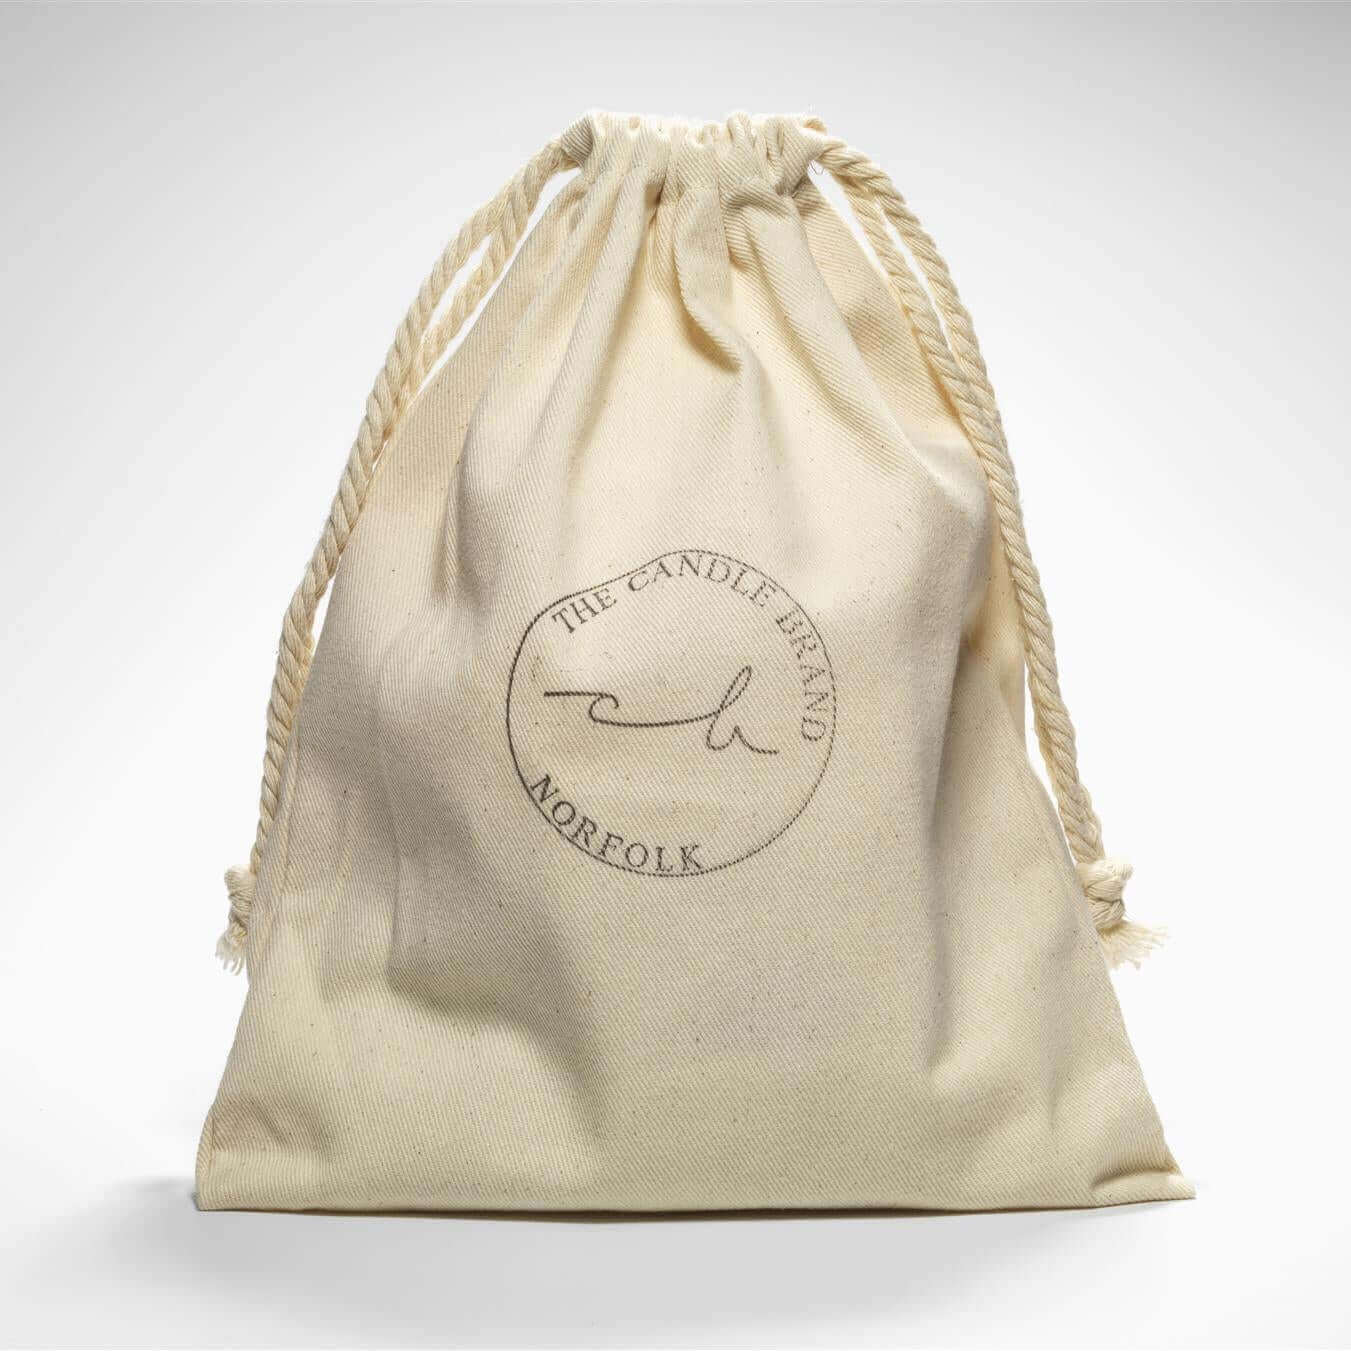 Eco-Friendly Cotton Bag The Candle Brand Home Fragrance